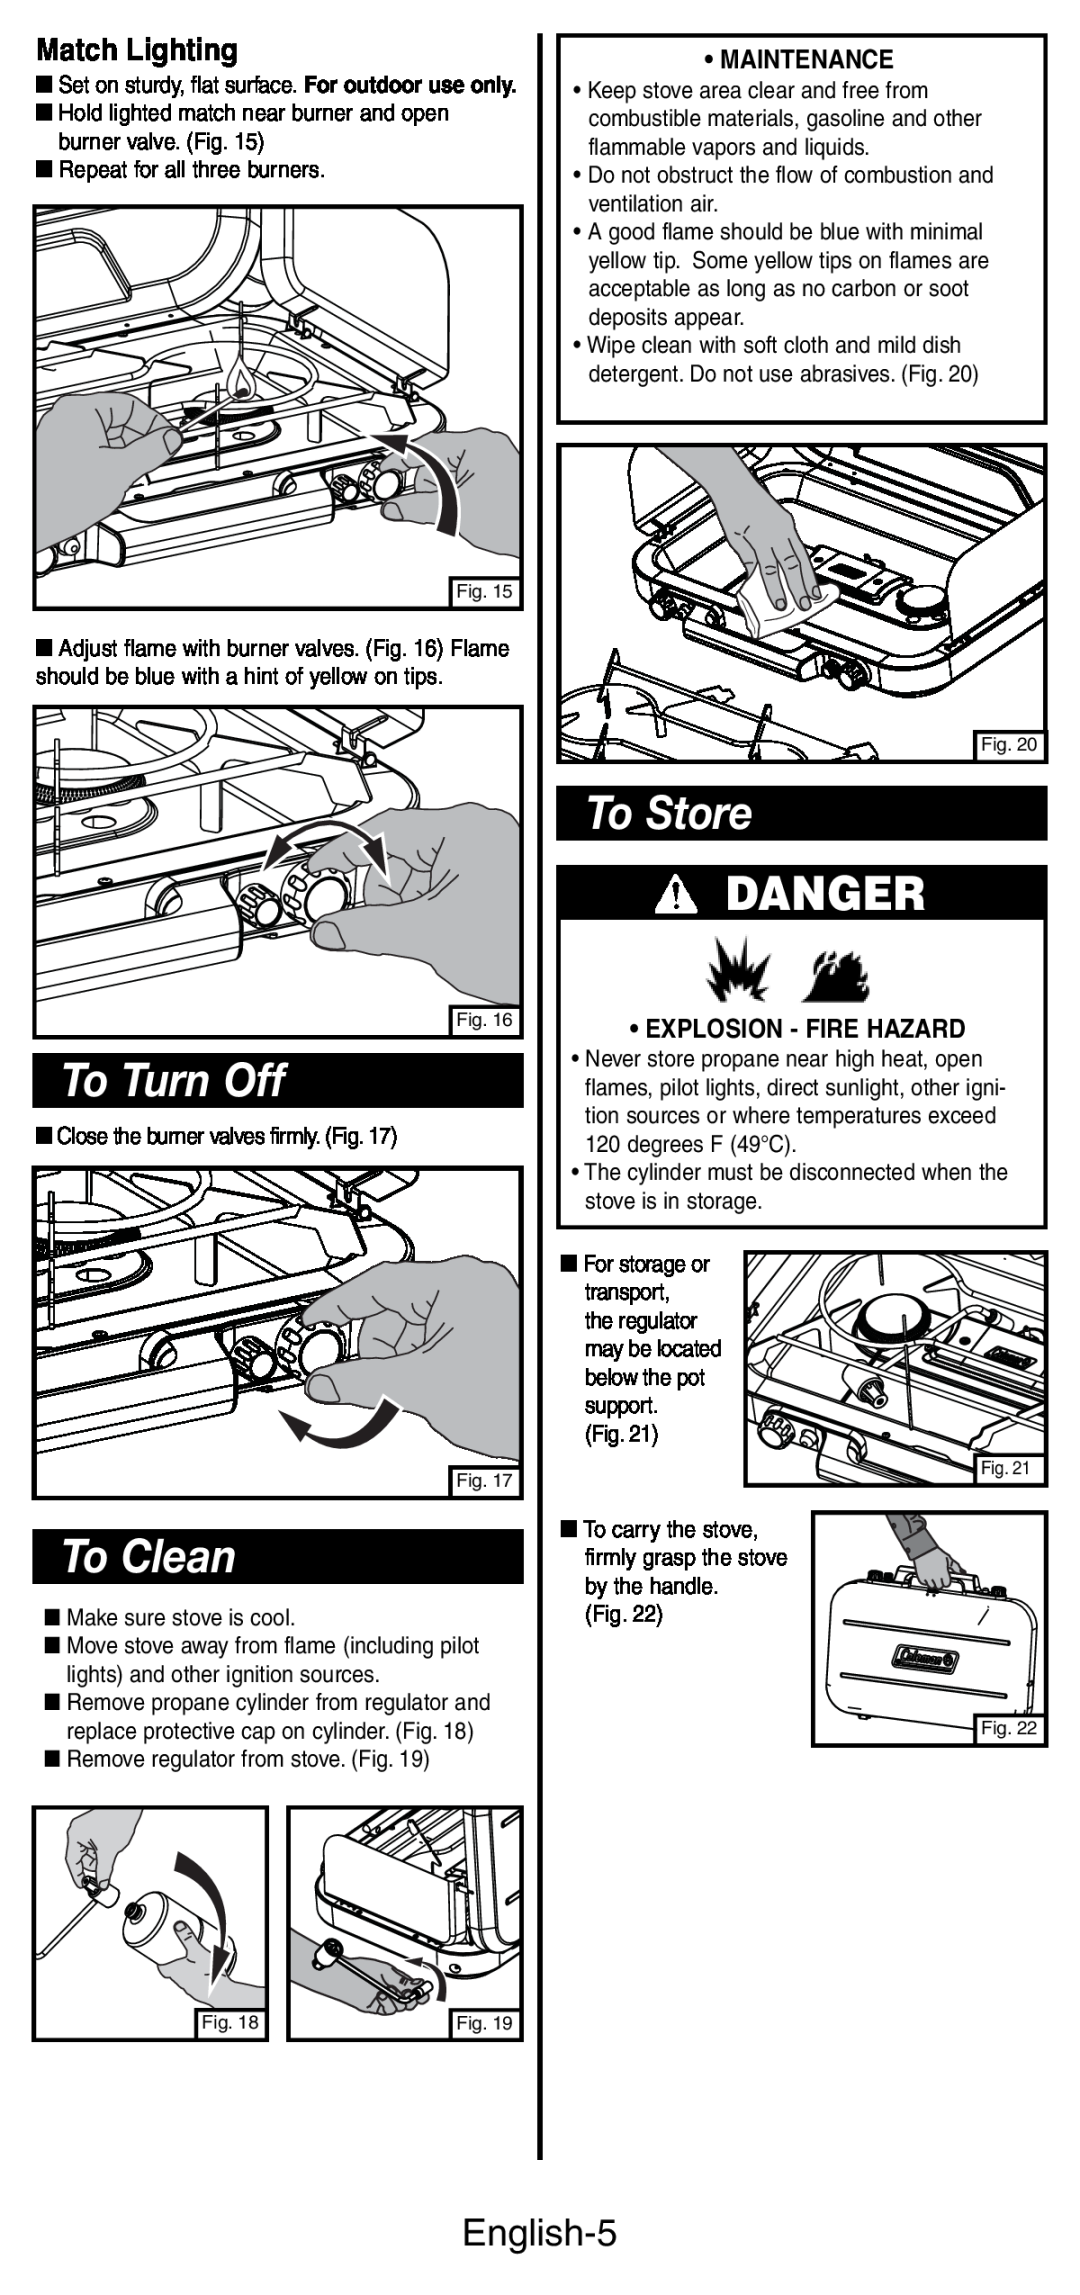 Coleman 5444 Series manual To Turn Off, To Clean, To Store, Danger, English-5, Match Lighting, Maintenance 